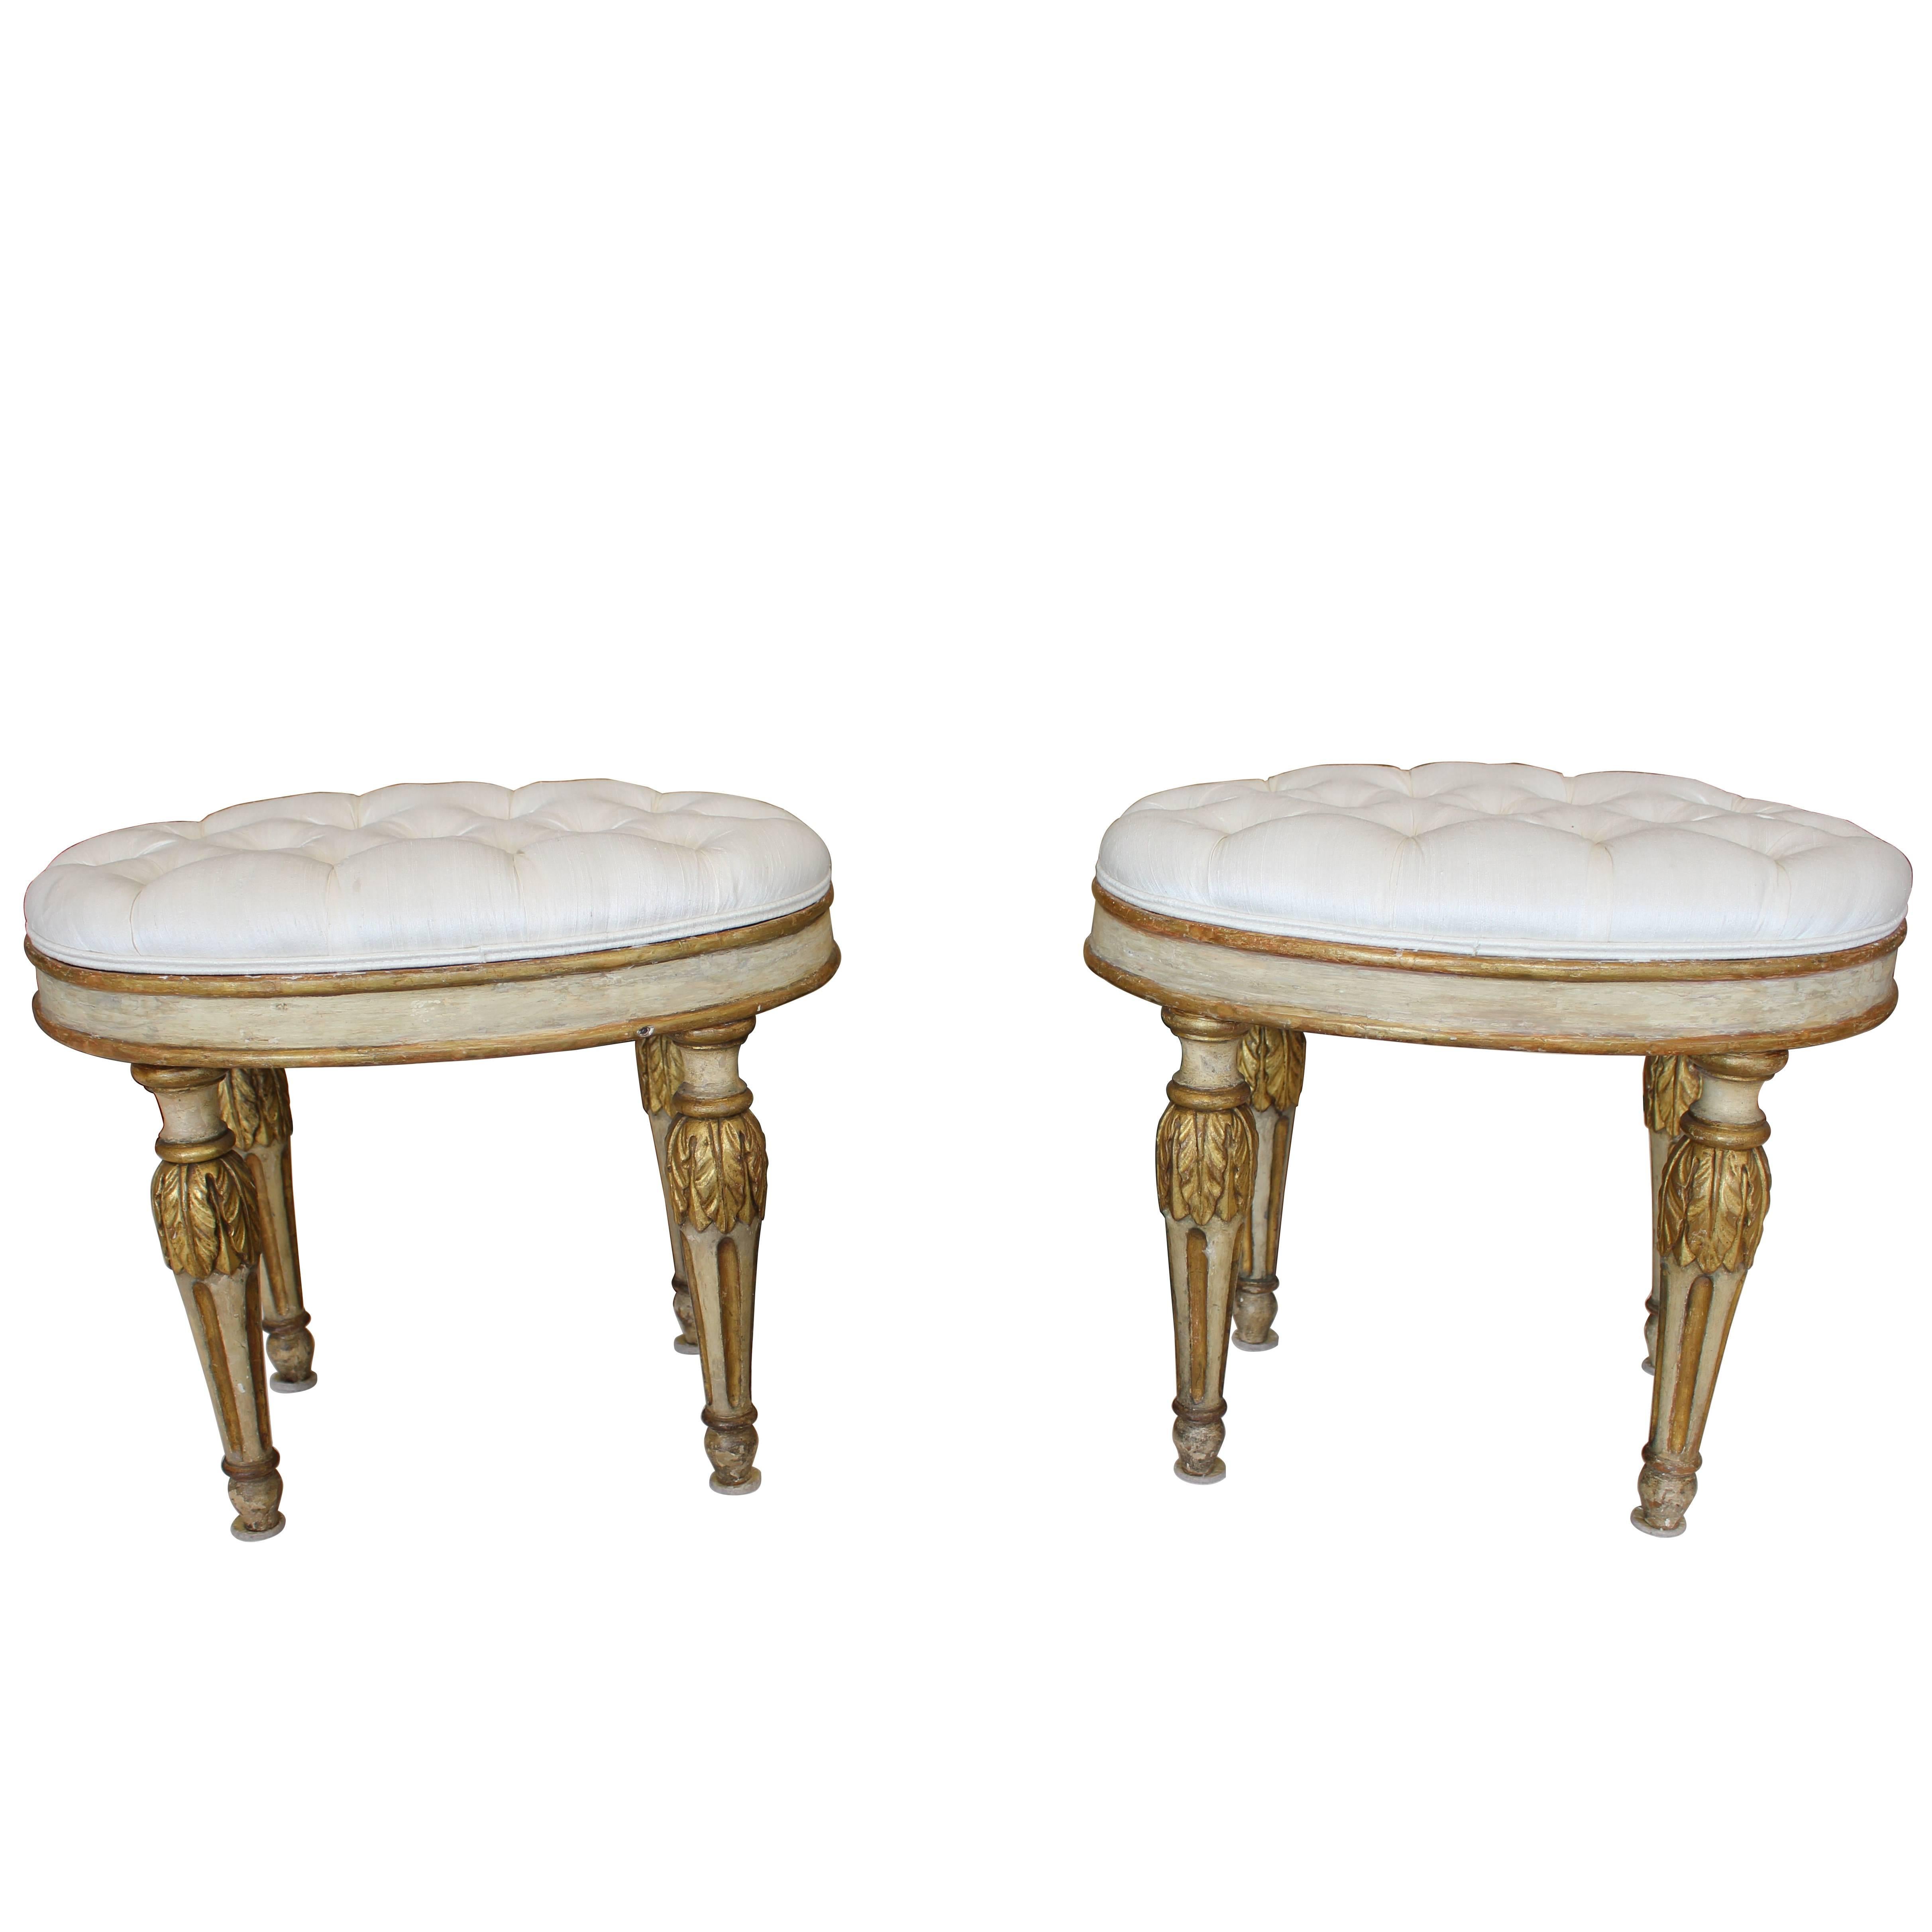 Pair of Italian Neoclassical Late 18th Century Oval Stools with Upholstered Seat For Sale